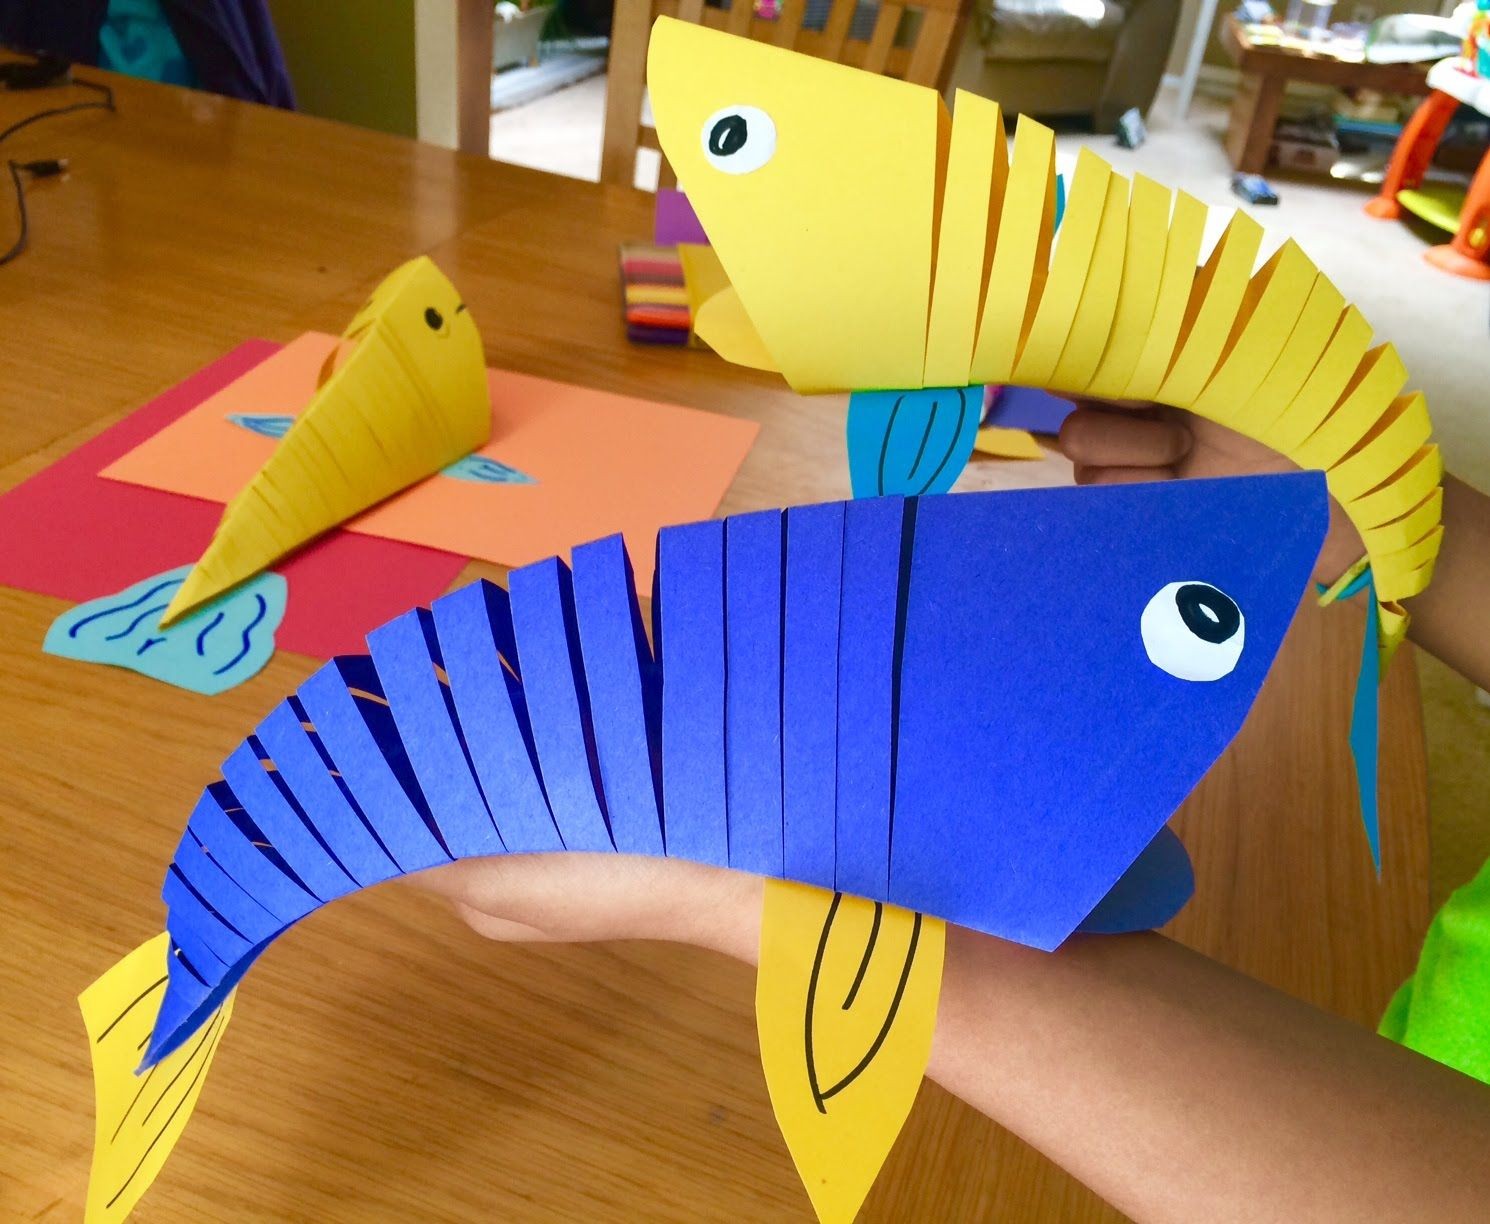 Papercraft Ideas for Children How to Make Moving Fish Paper Craft